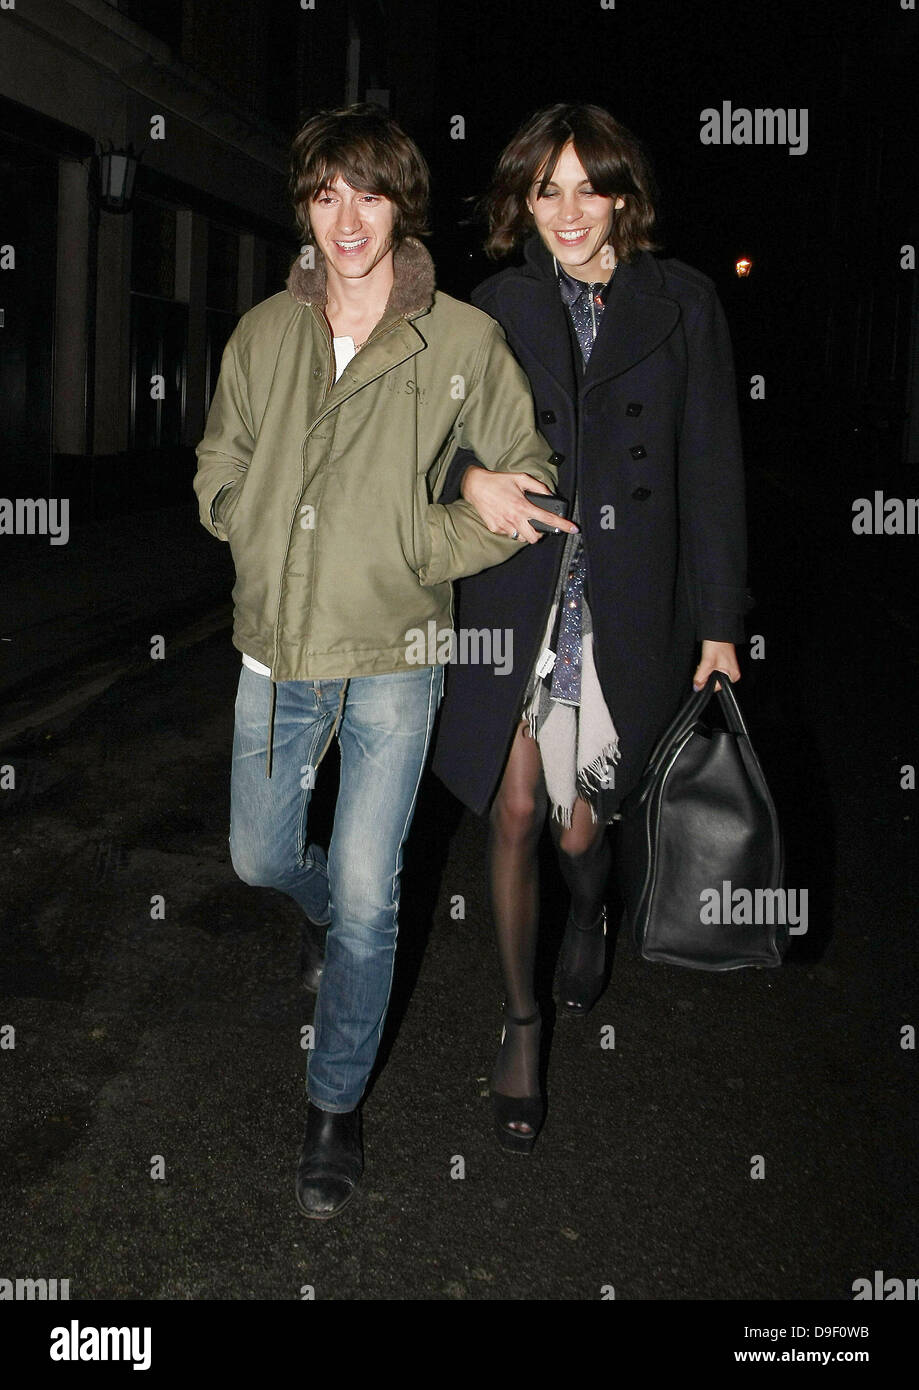 Alex Turner and Alexa Chung Celebrities leave The Ivy Club having earlier  attended the NME Awards 2011 London, England  Stock Photo - Alamy